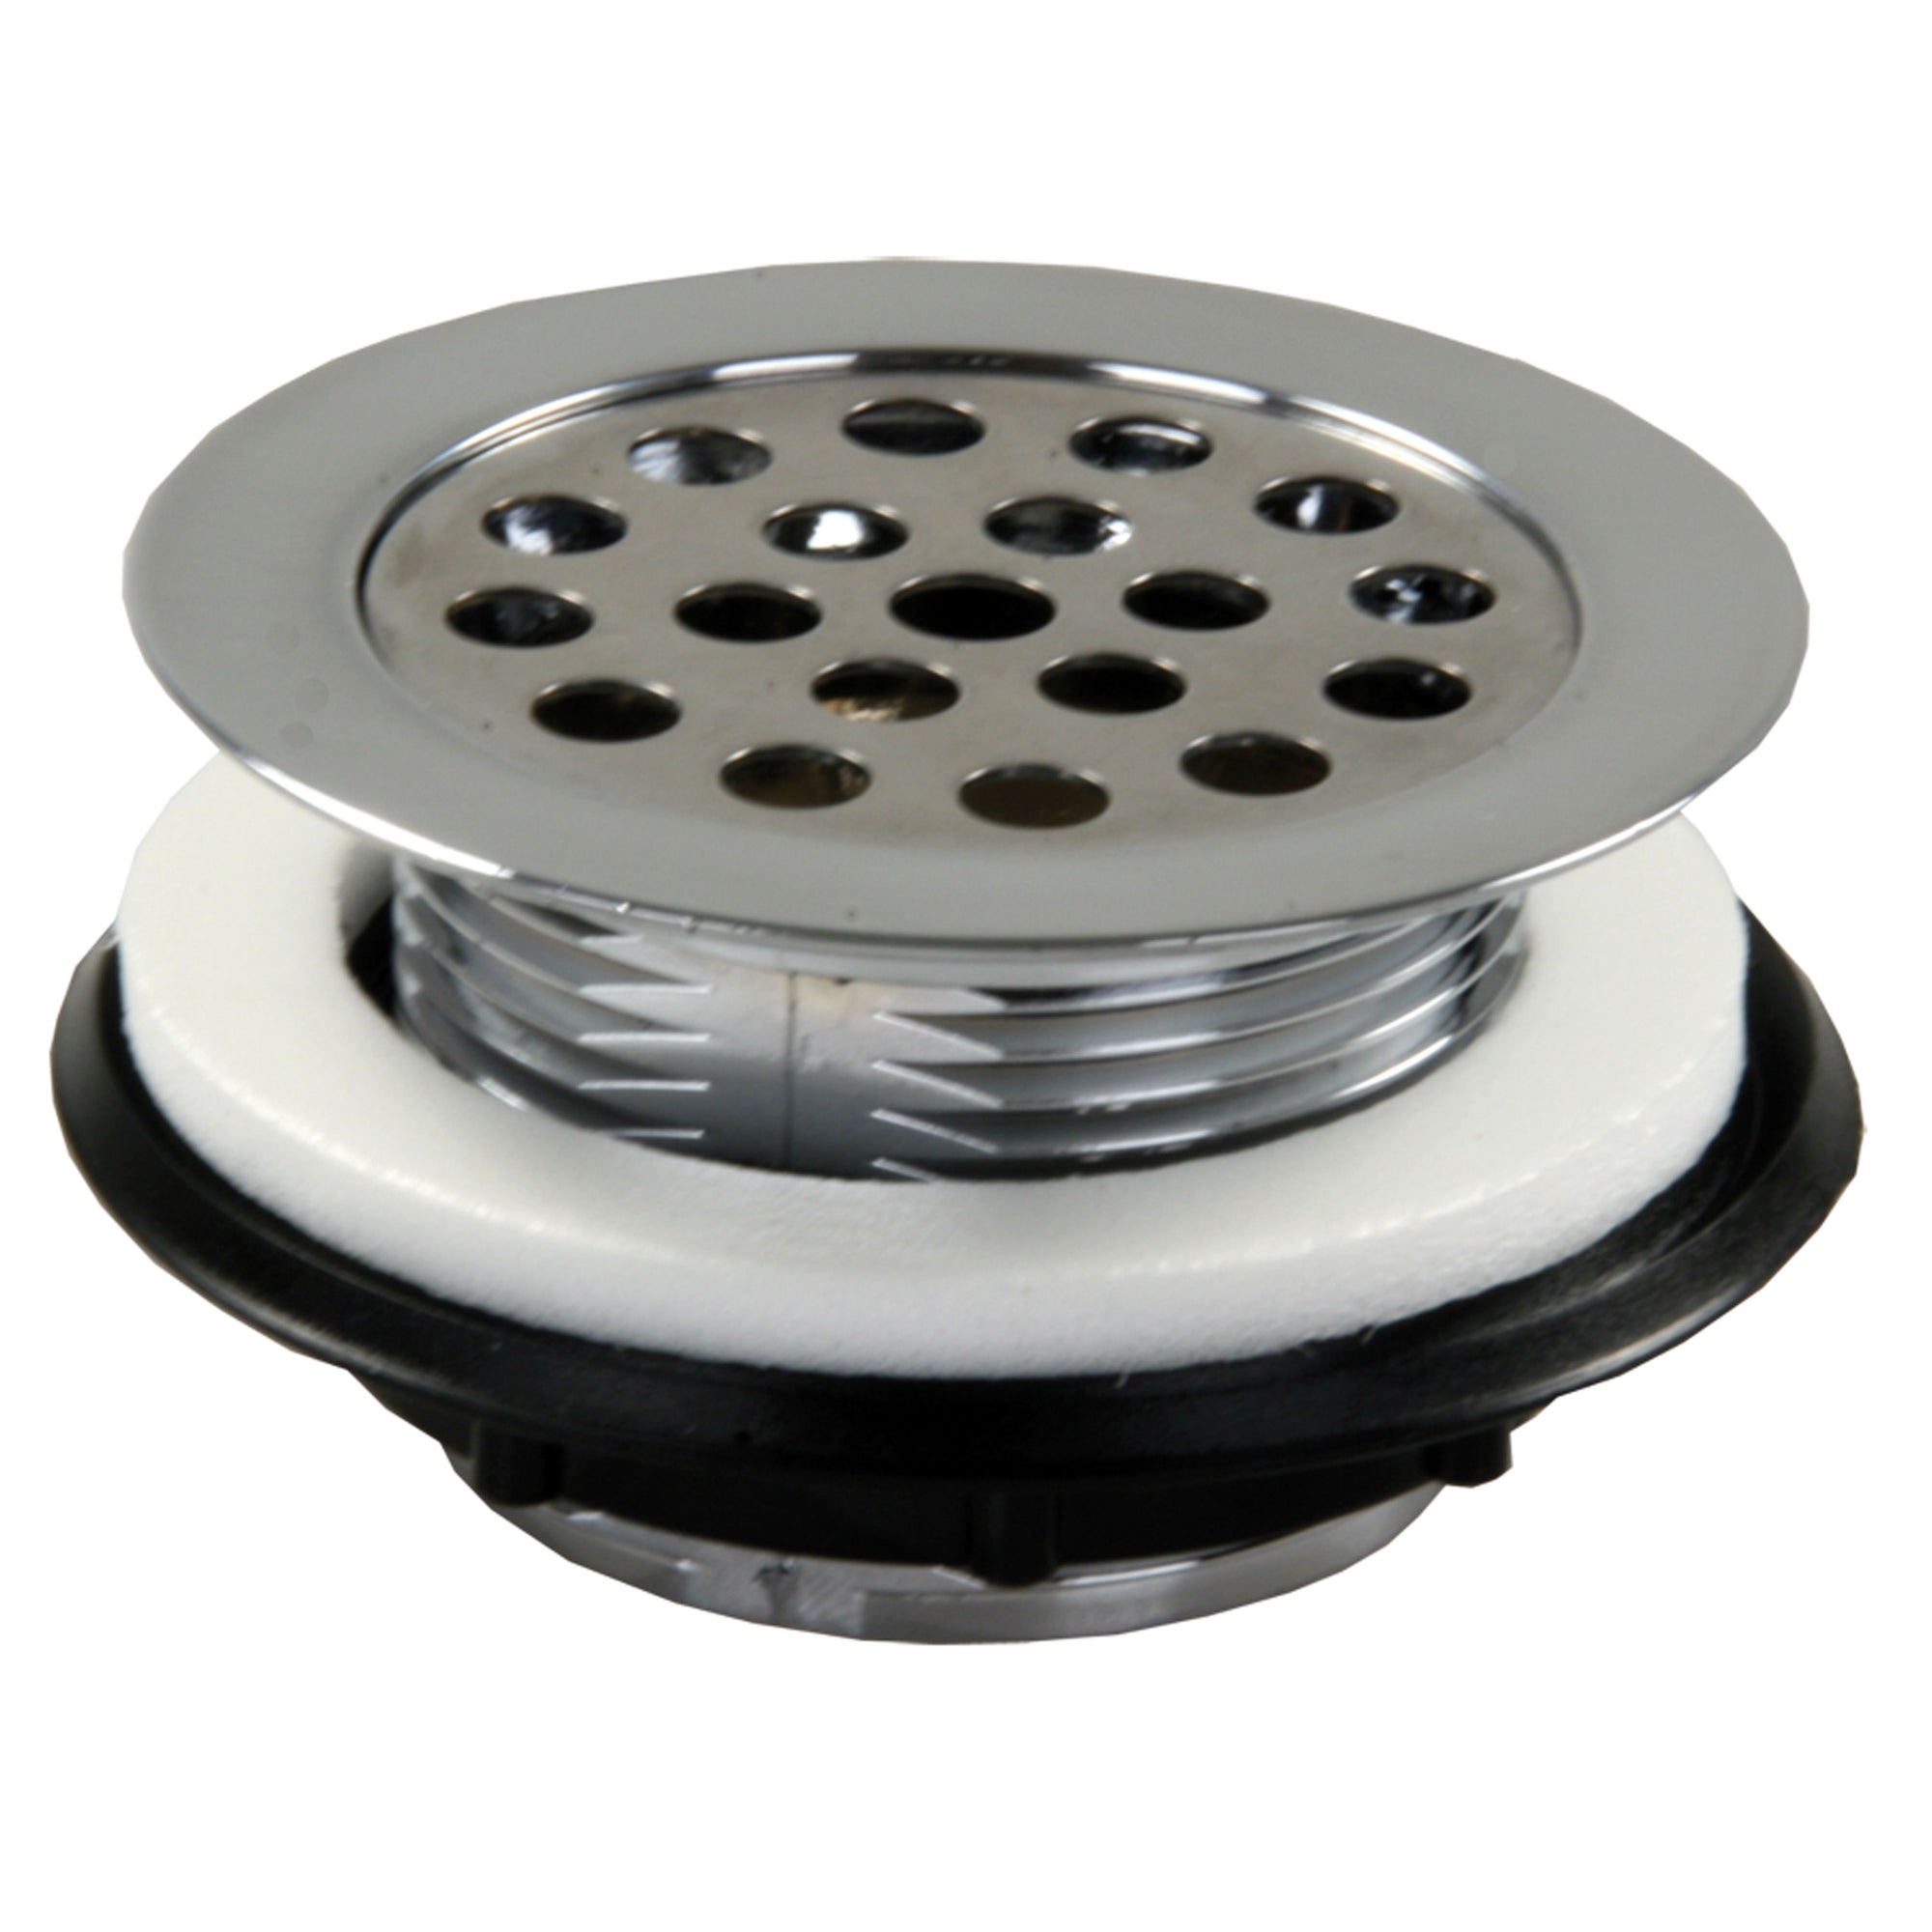 JR Products 95175 Shower Strainer with Grid - Chrome